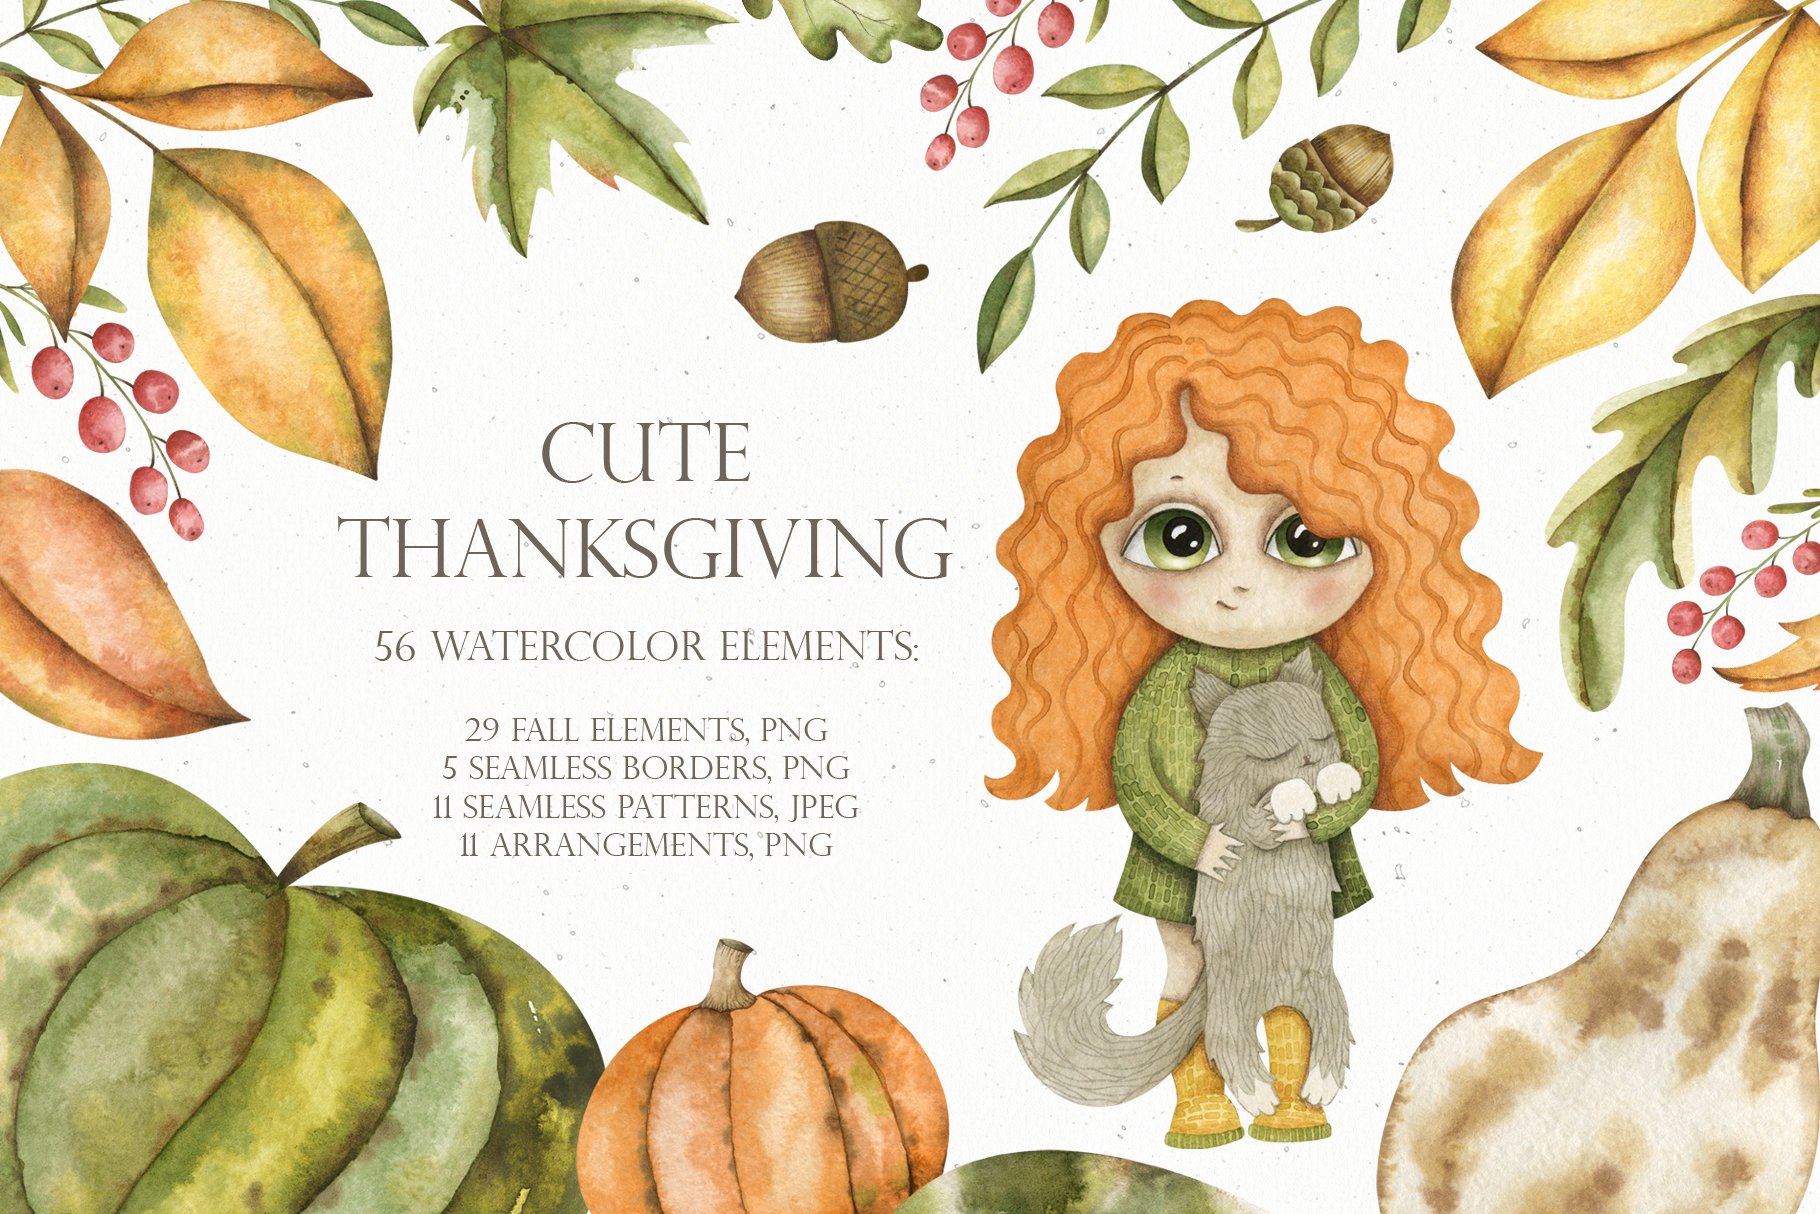 Watercolor Cute Thanksgiving Set cover image.